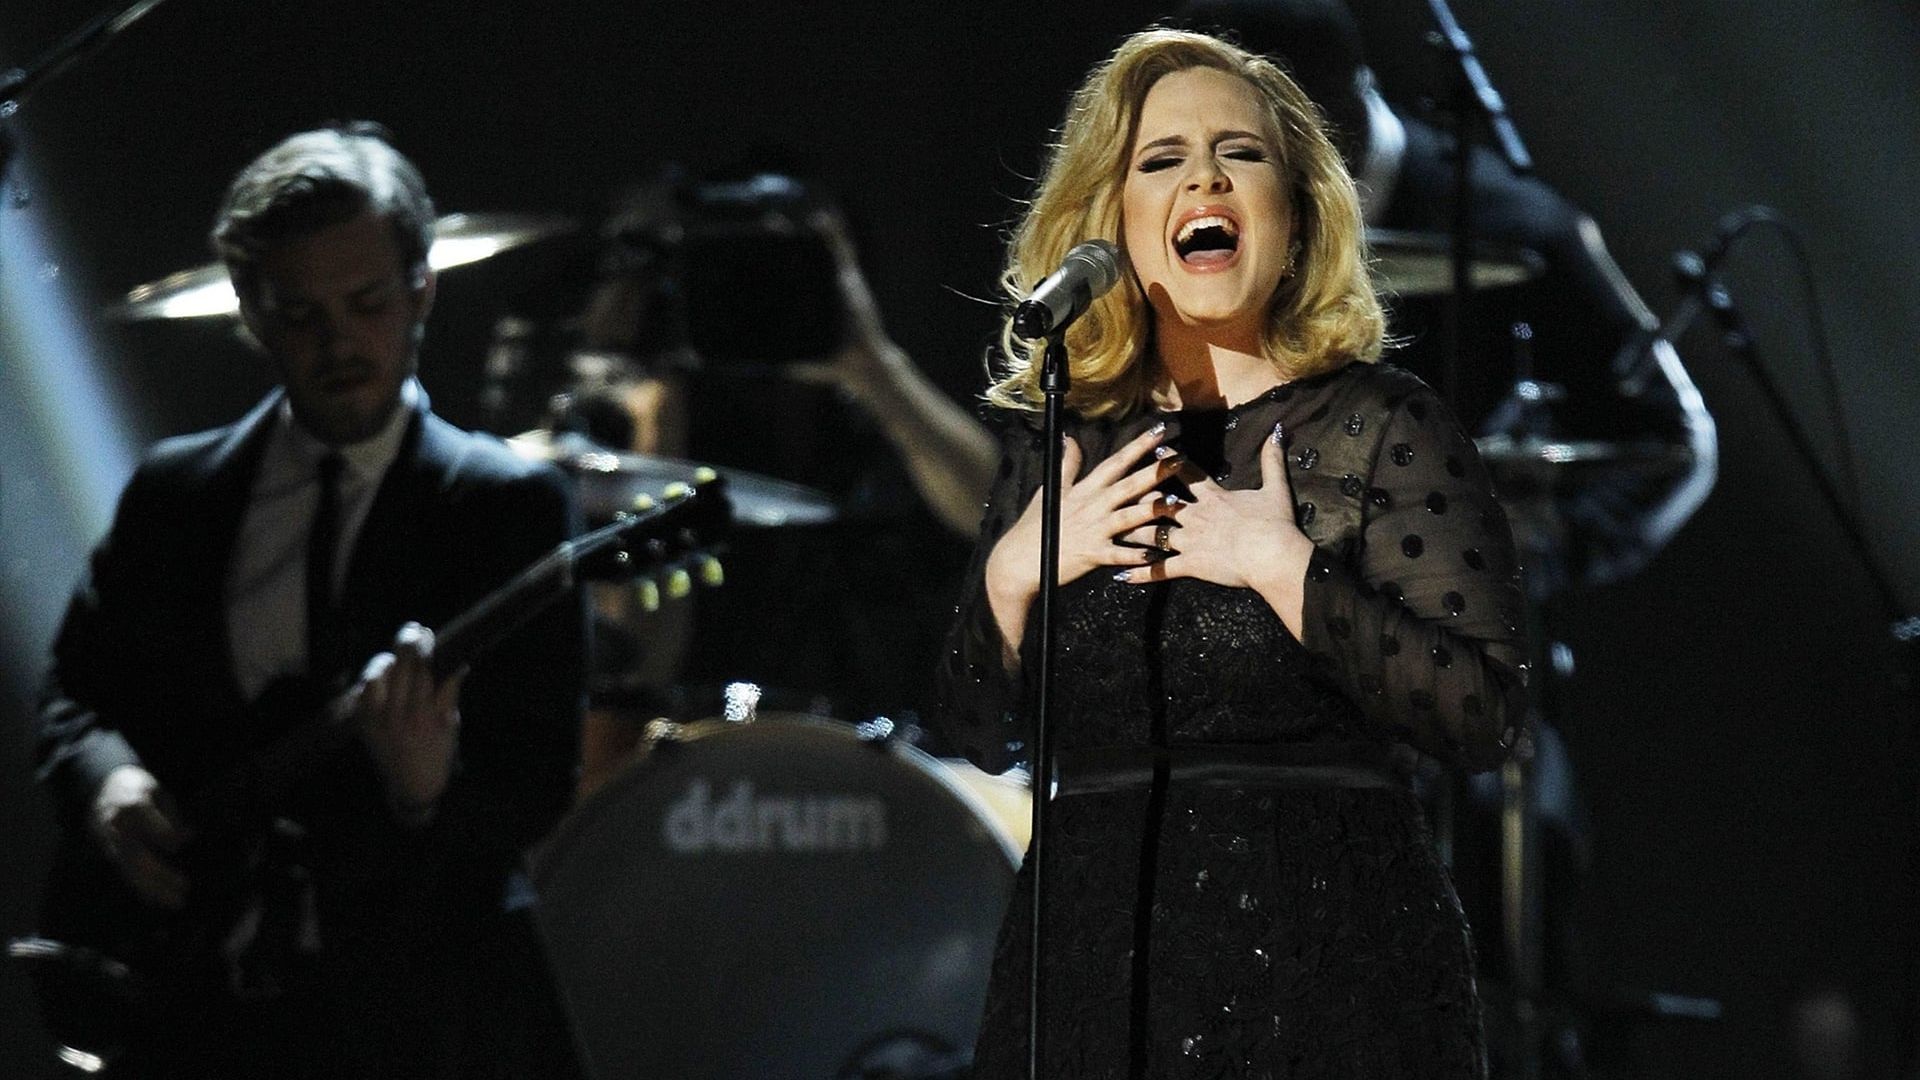 Adele Live at the Royal Albert Hall background